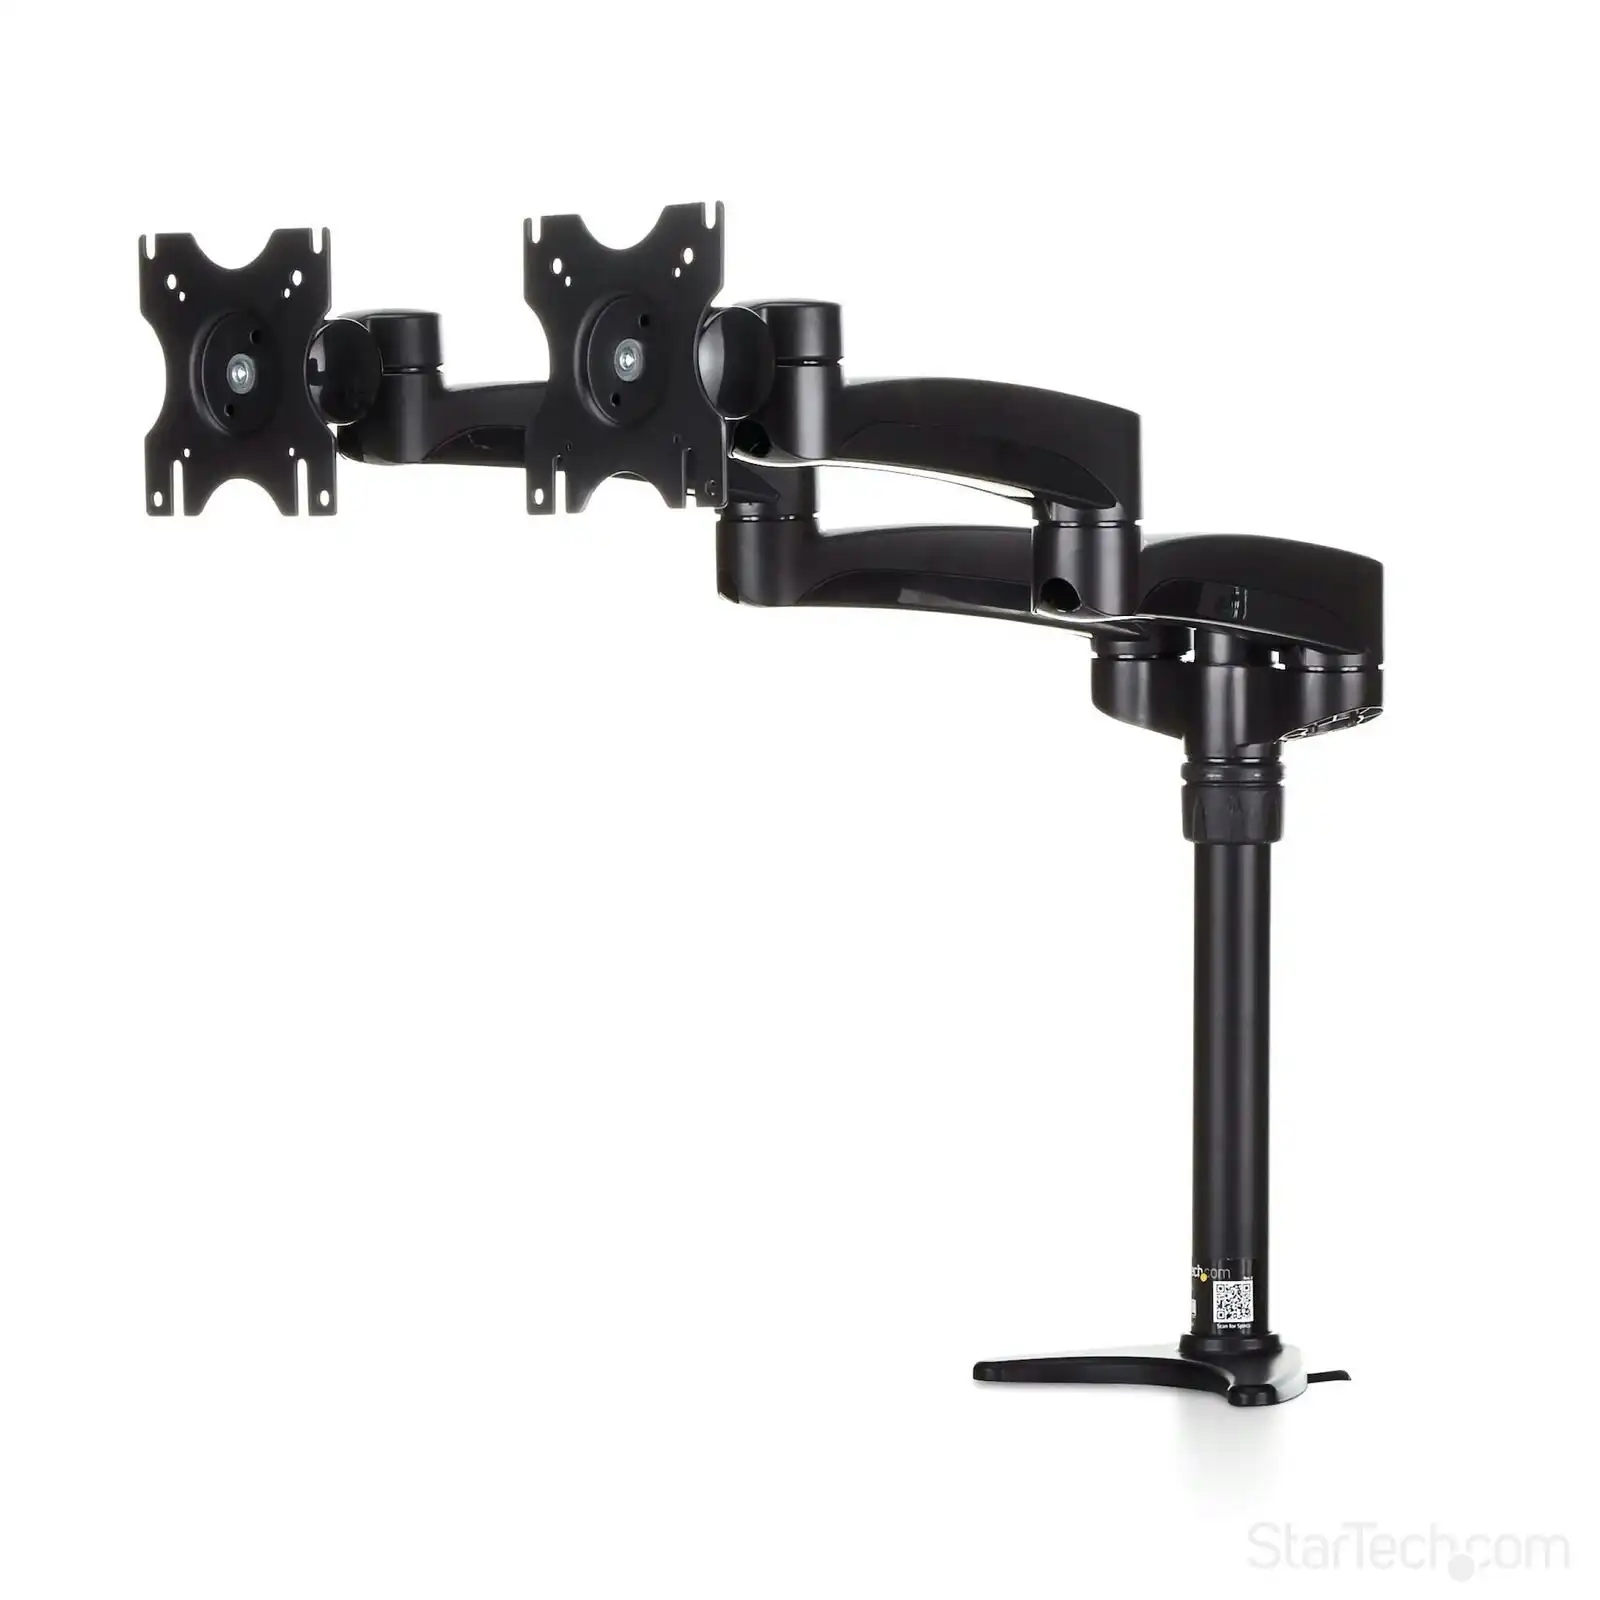 Star Tech Ergonomic Desk Mount Dual Monitor Articulating Arm for 12-24in Display